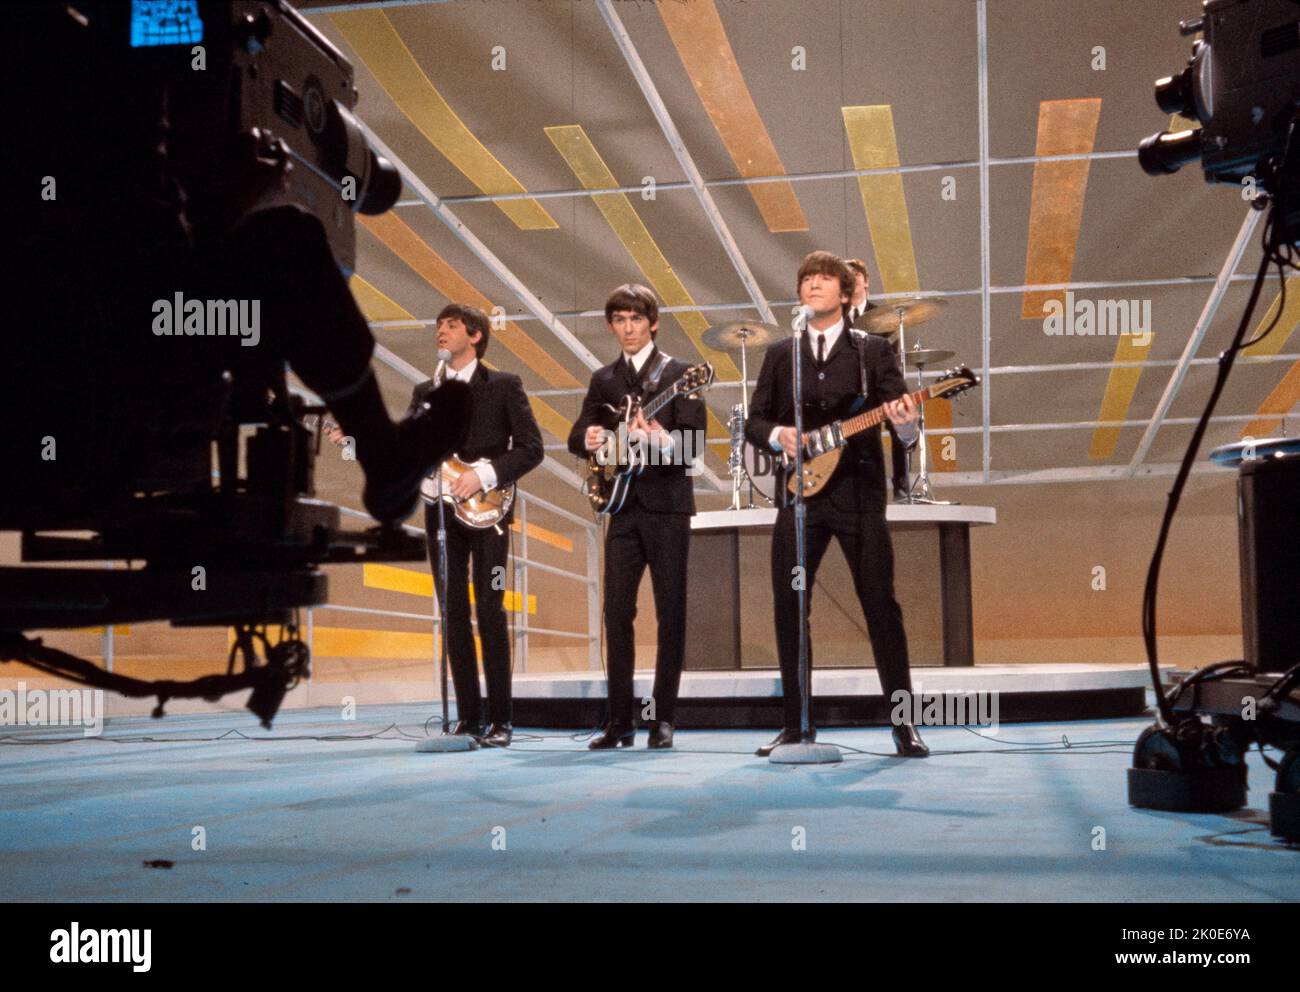 1964 United States tour by the Beatles, an English rock band formed in Liverpool in 1960. The group, whose best-known line-up comprised John Lennon, Paul McCartney, George Harrison and Ringo Starr, are regarded as the most influential band of all time. Stock Photo